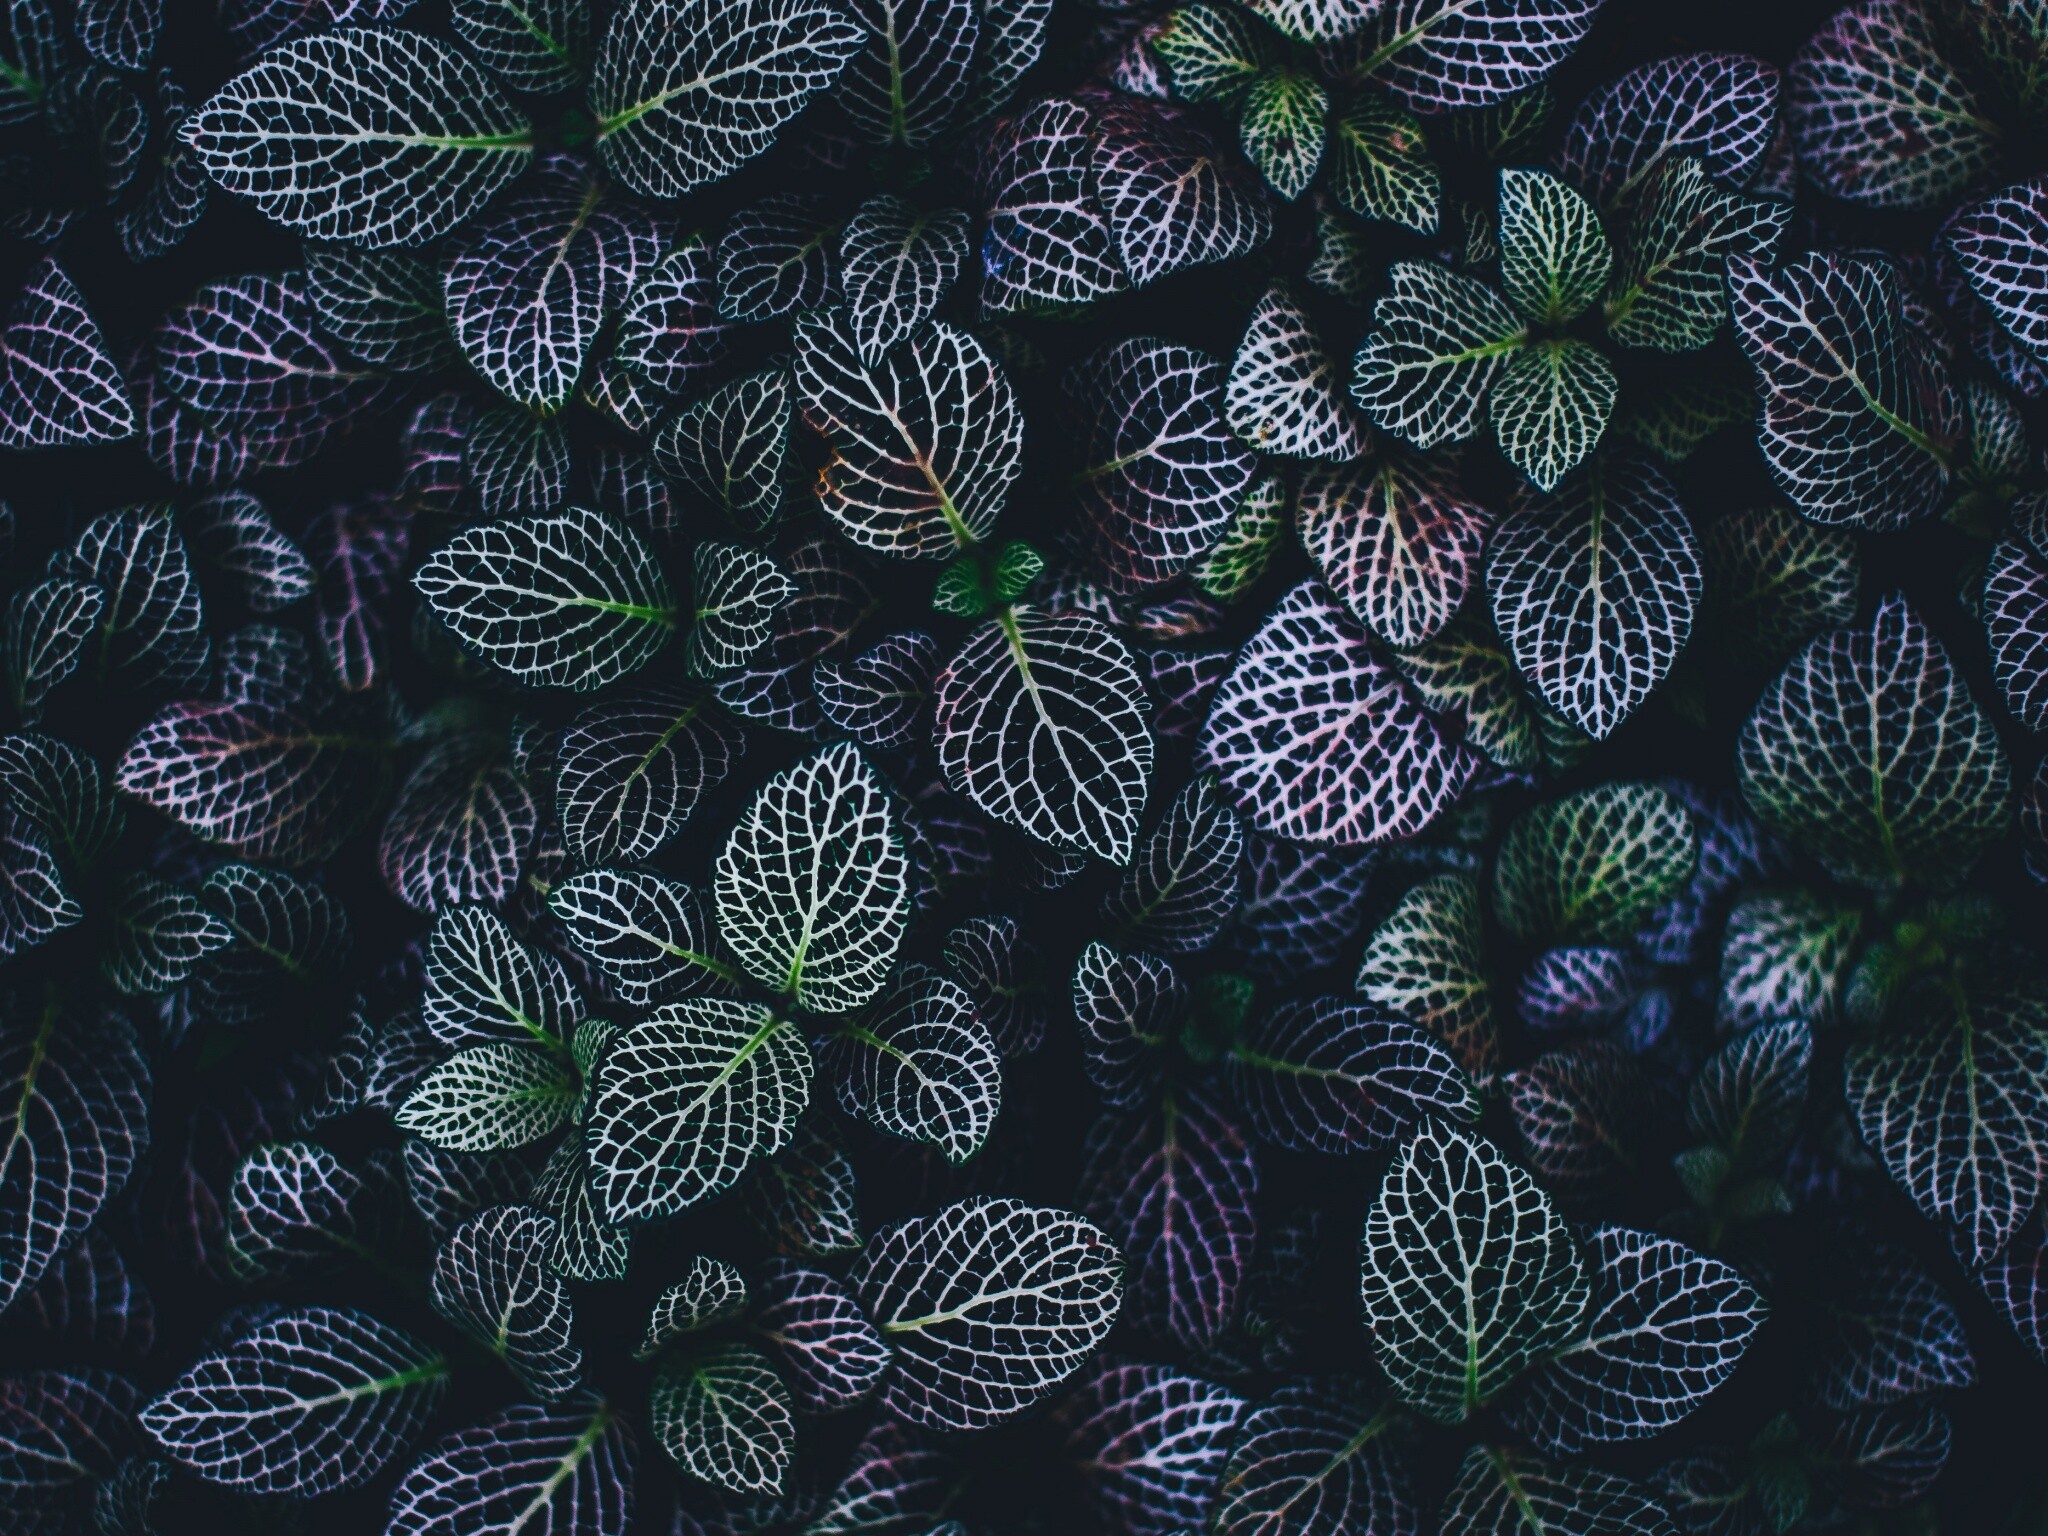 Leaves: Fittonia, A genus of flowering plants, Accented veins of white to deep pink. 2050x1540 HD Wallpaper.